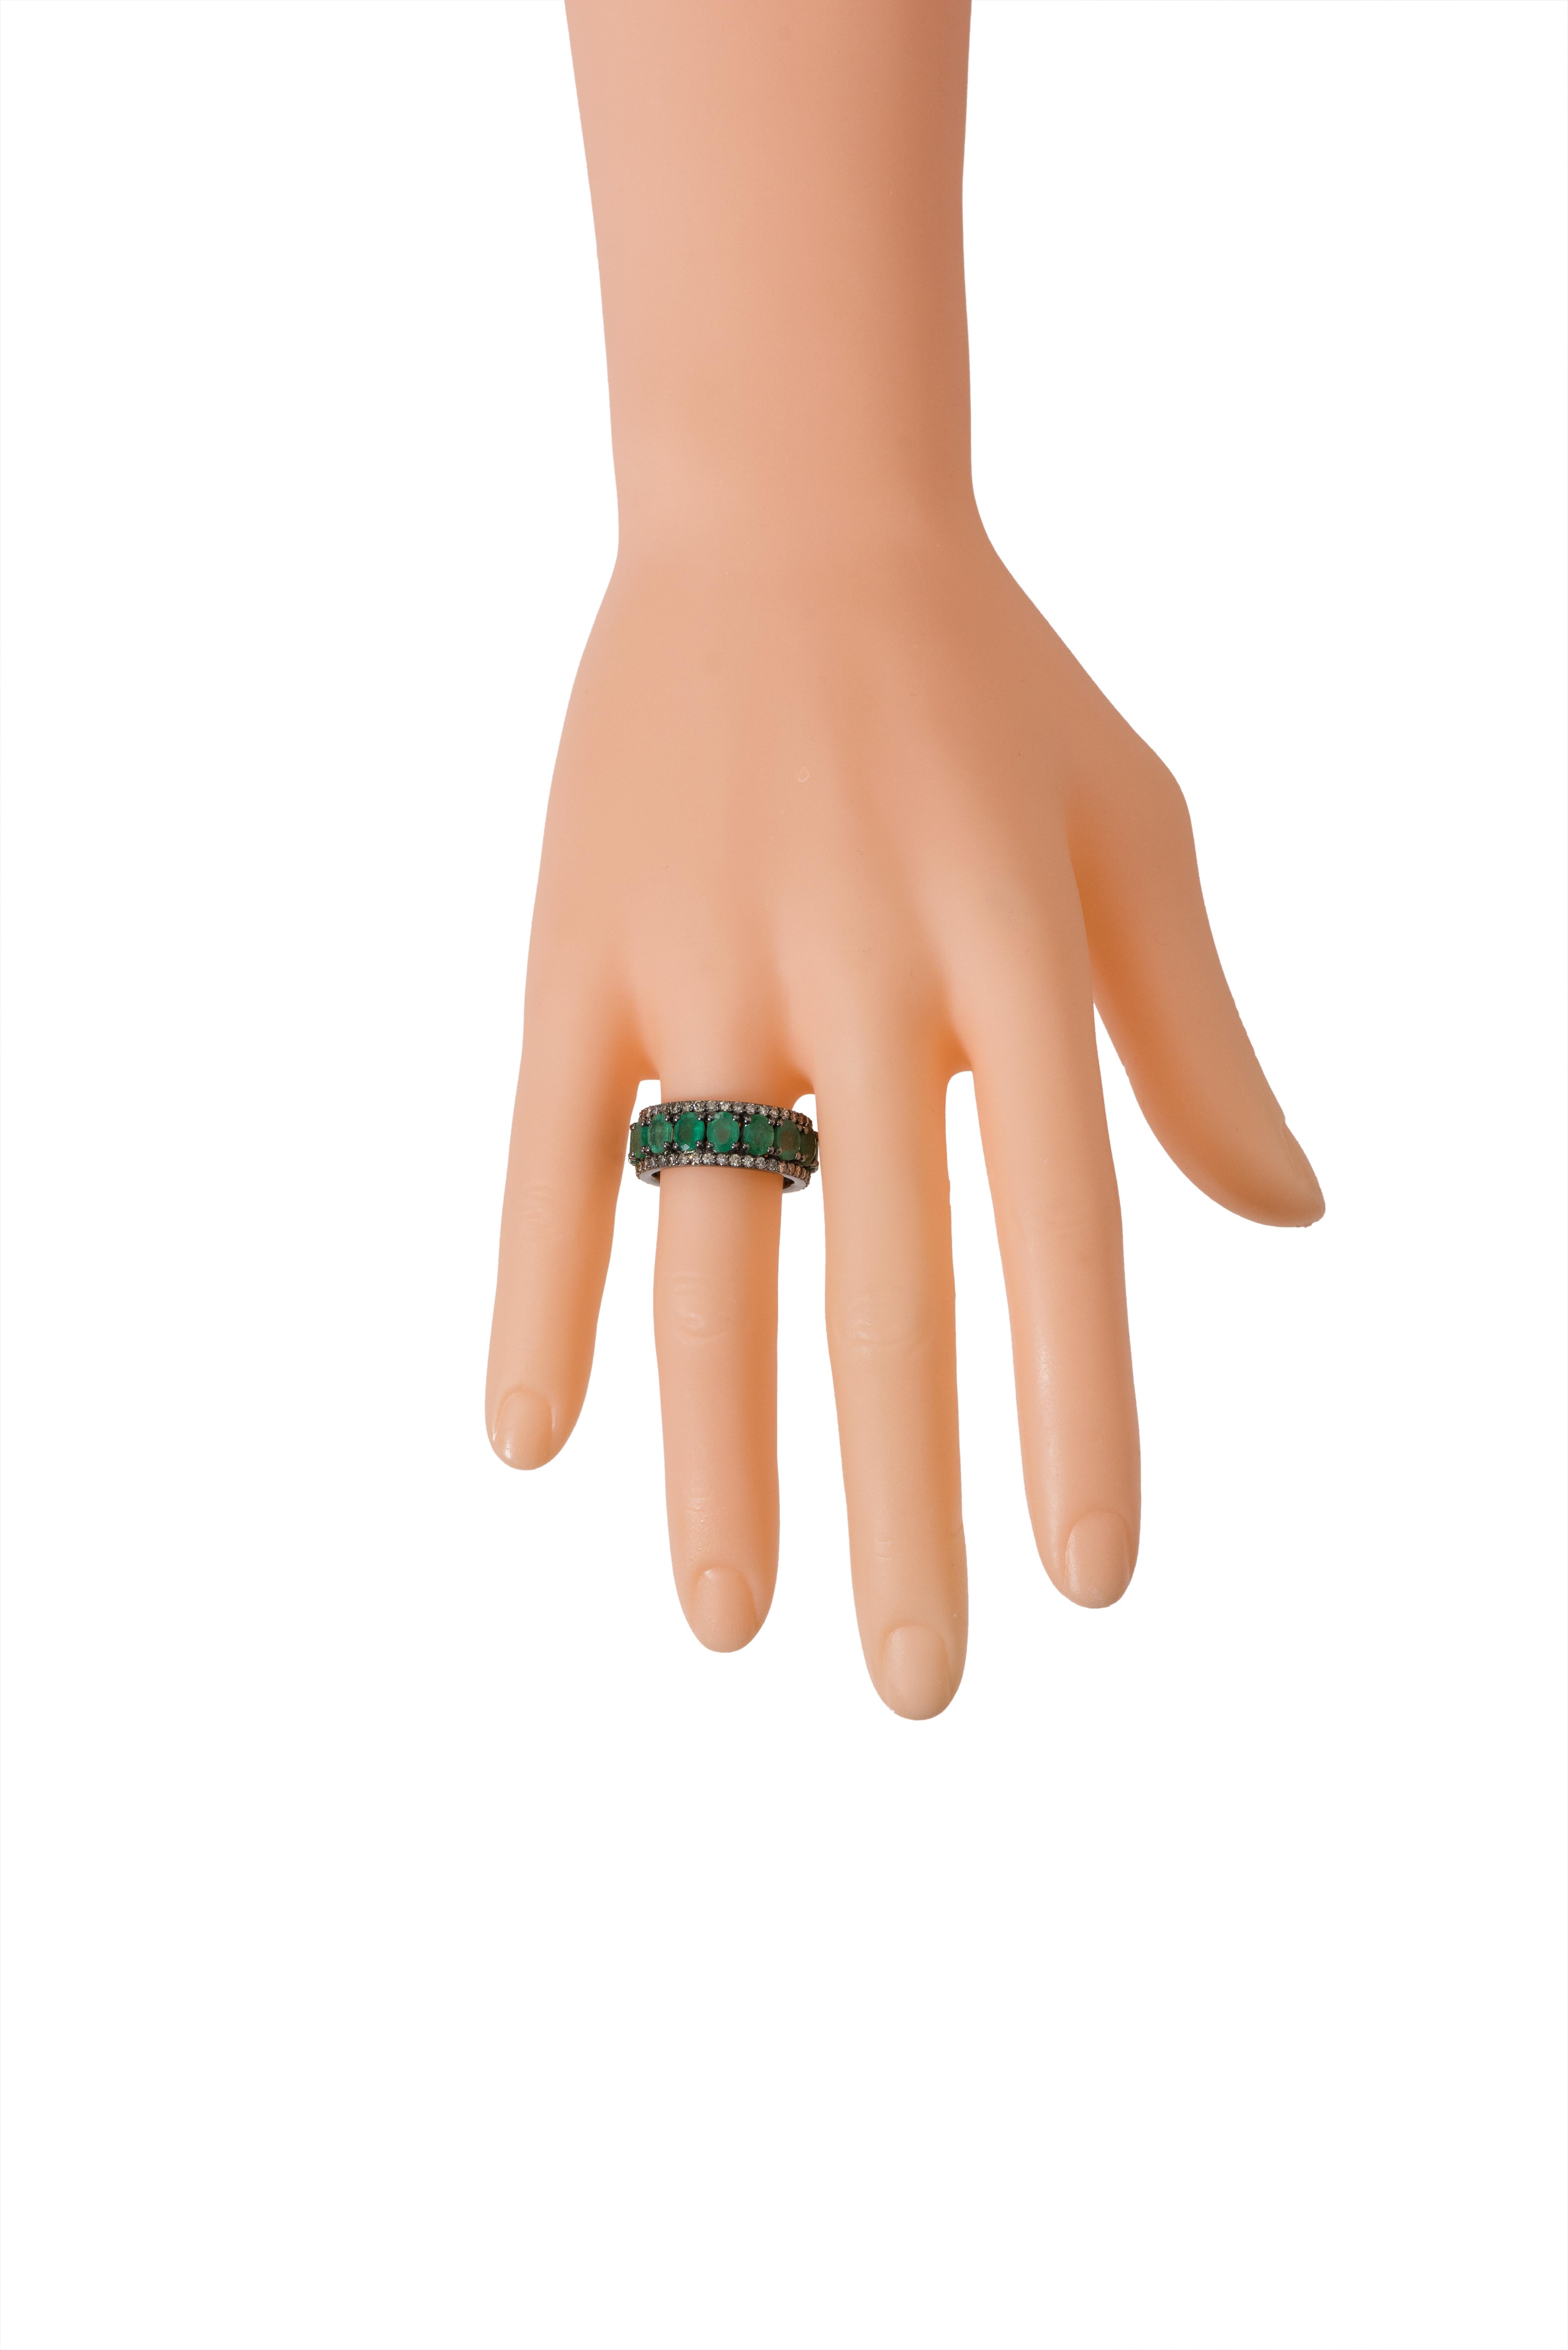 5.30 Carat Emerald and Diamond Ring Band in Victorian Style For Sale 2